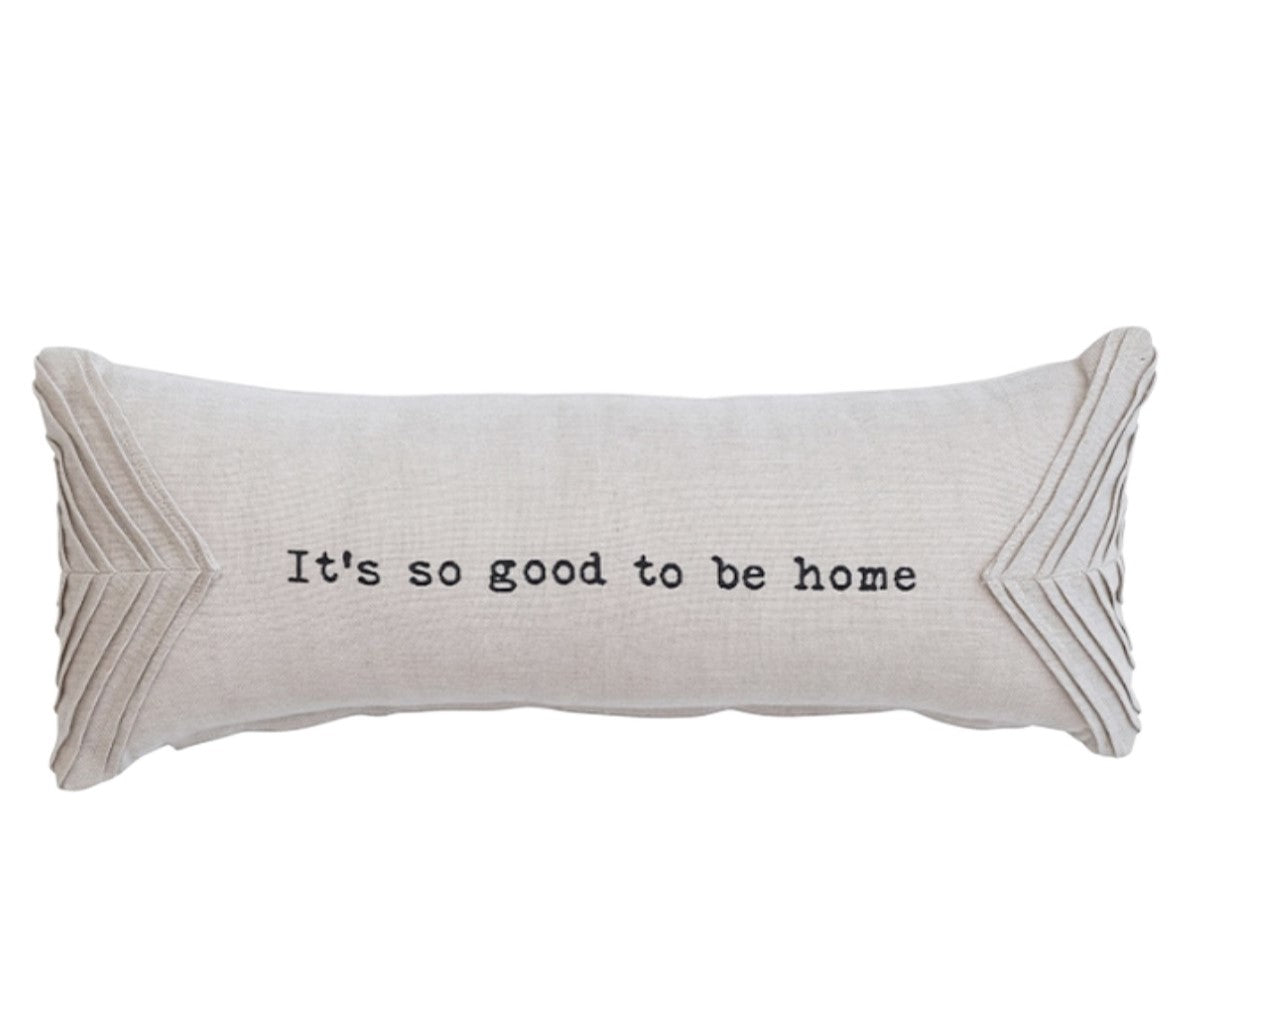 Cotton Chambray Lumbar Pillow "Its So Good to Be Home"